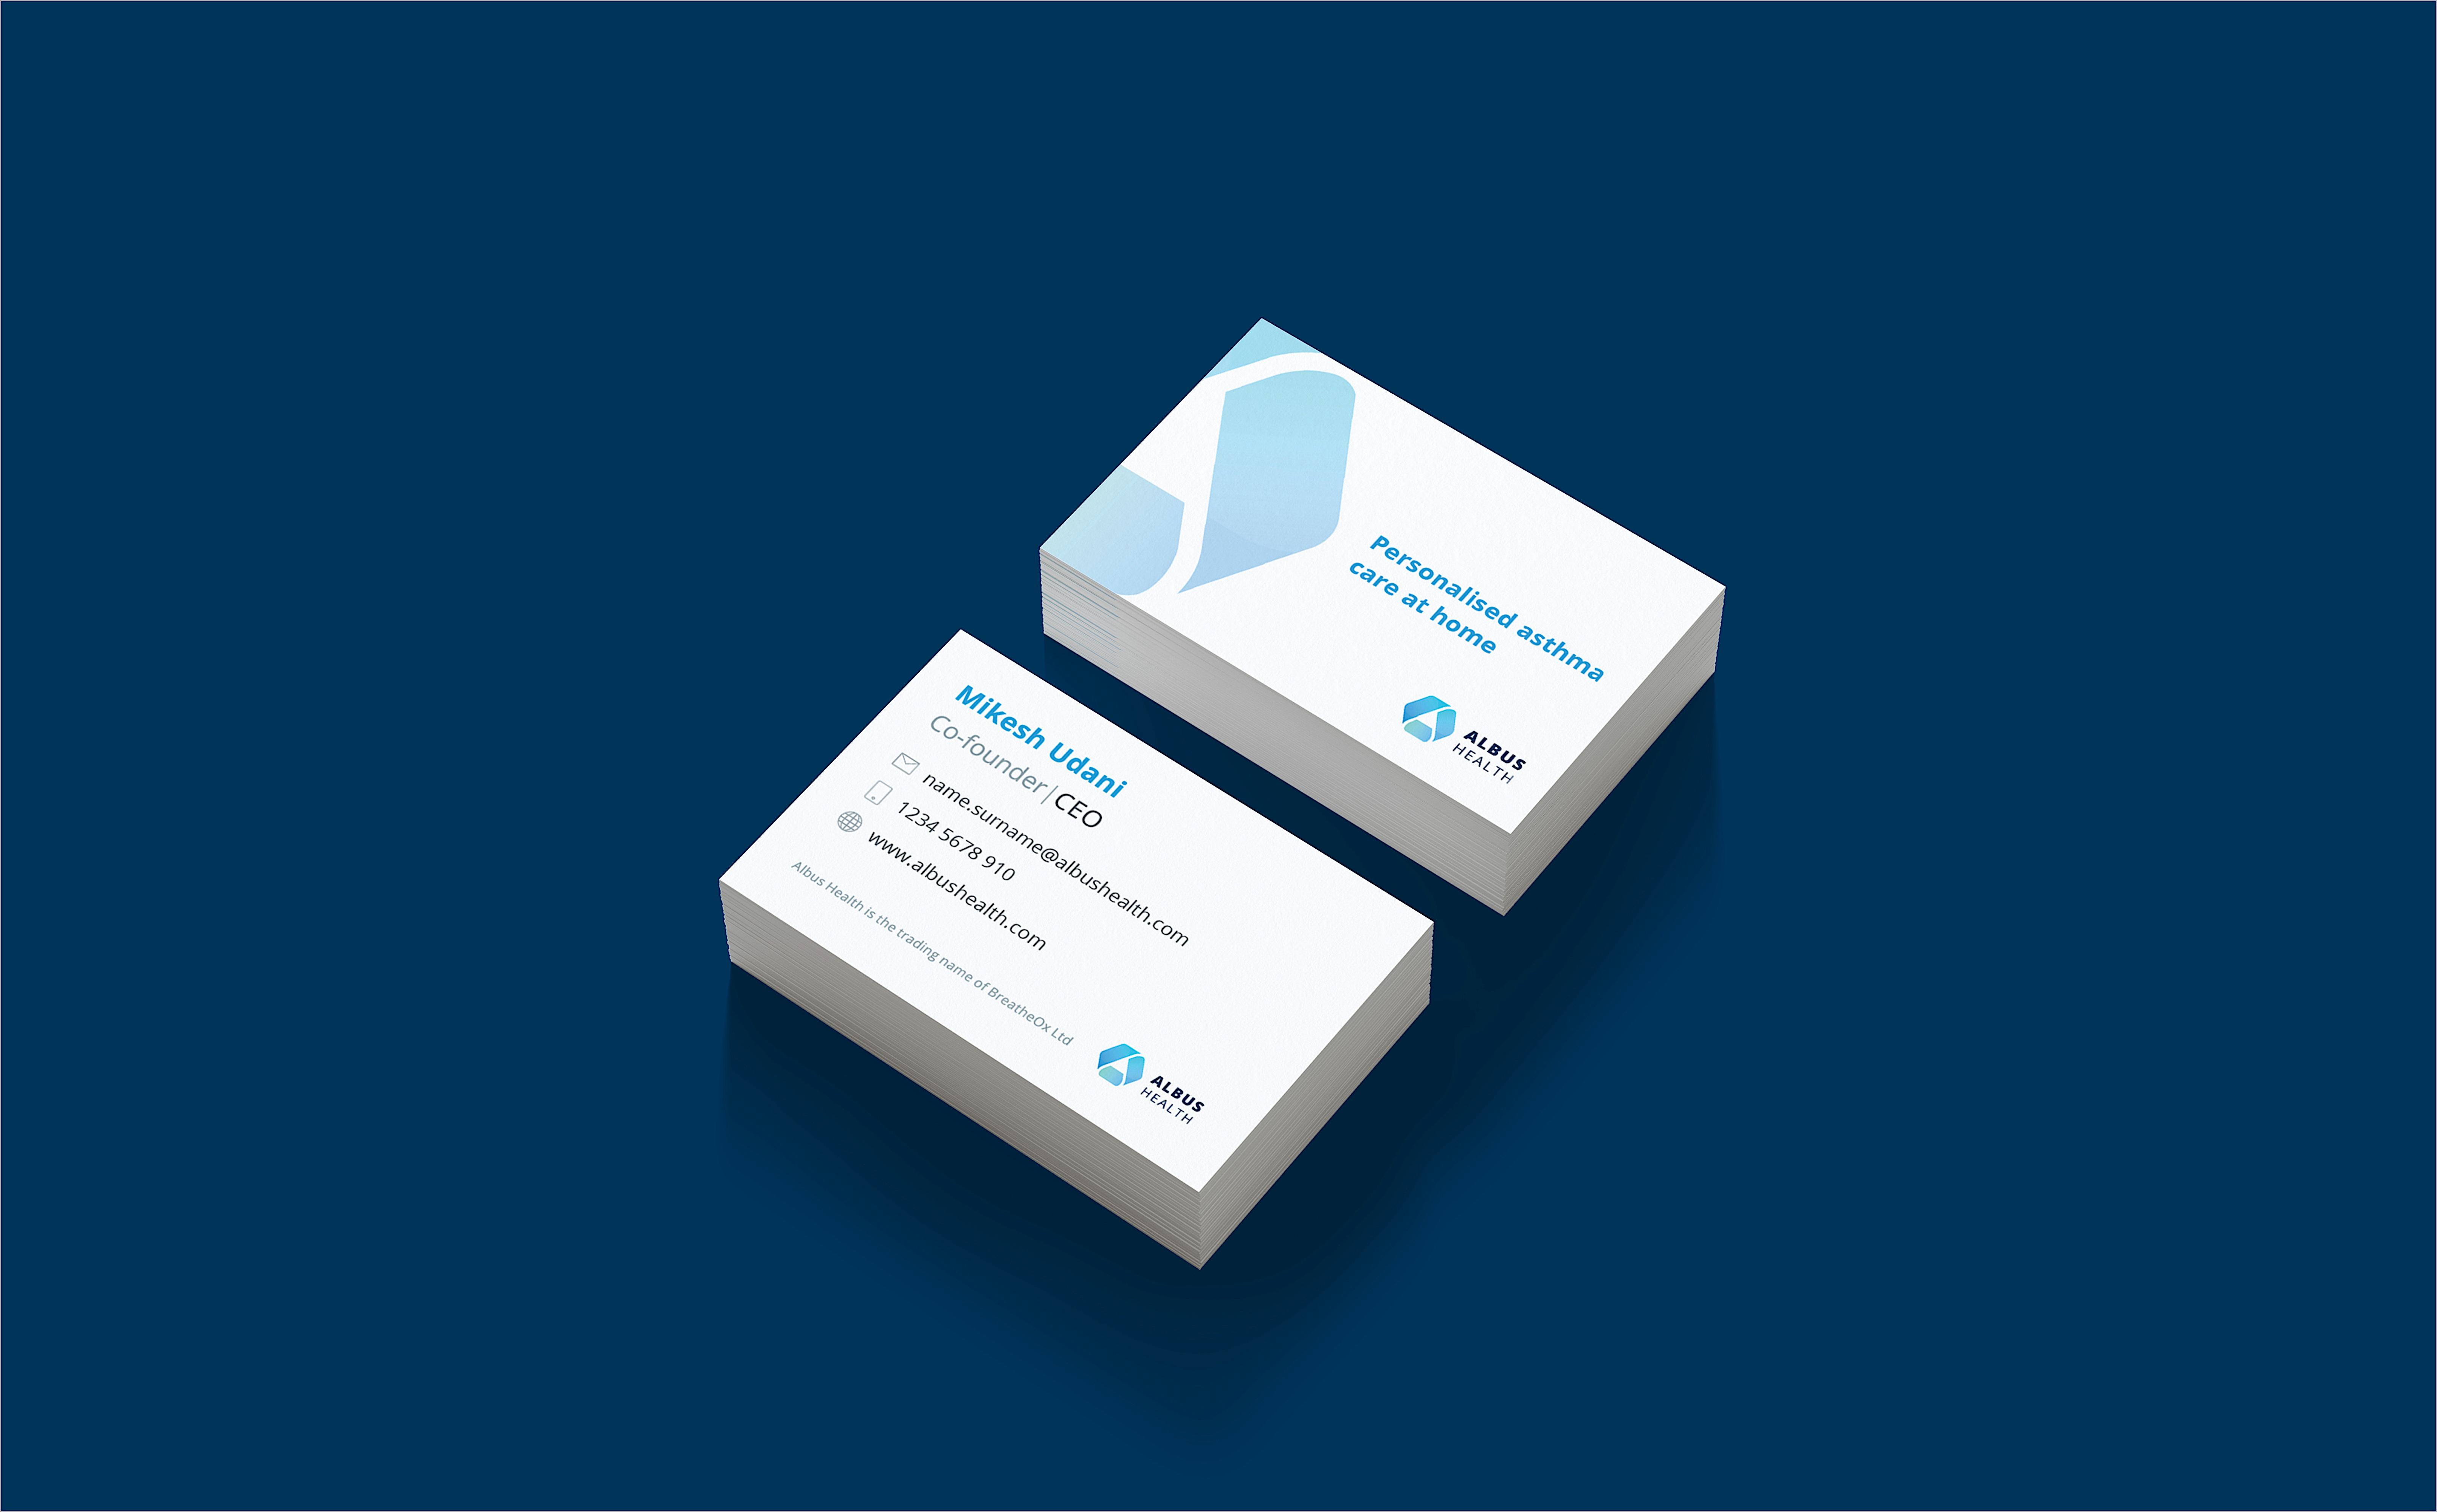 Business cards for Albus Health